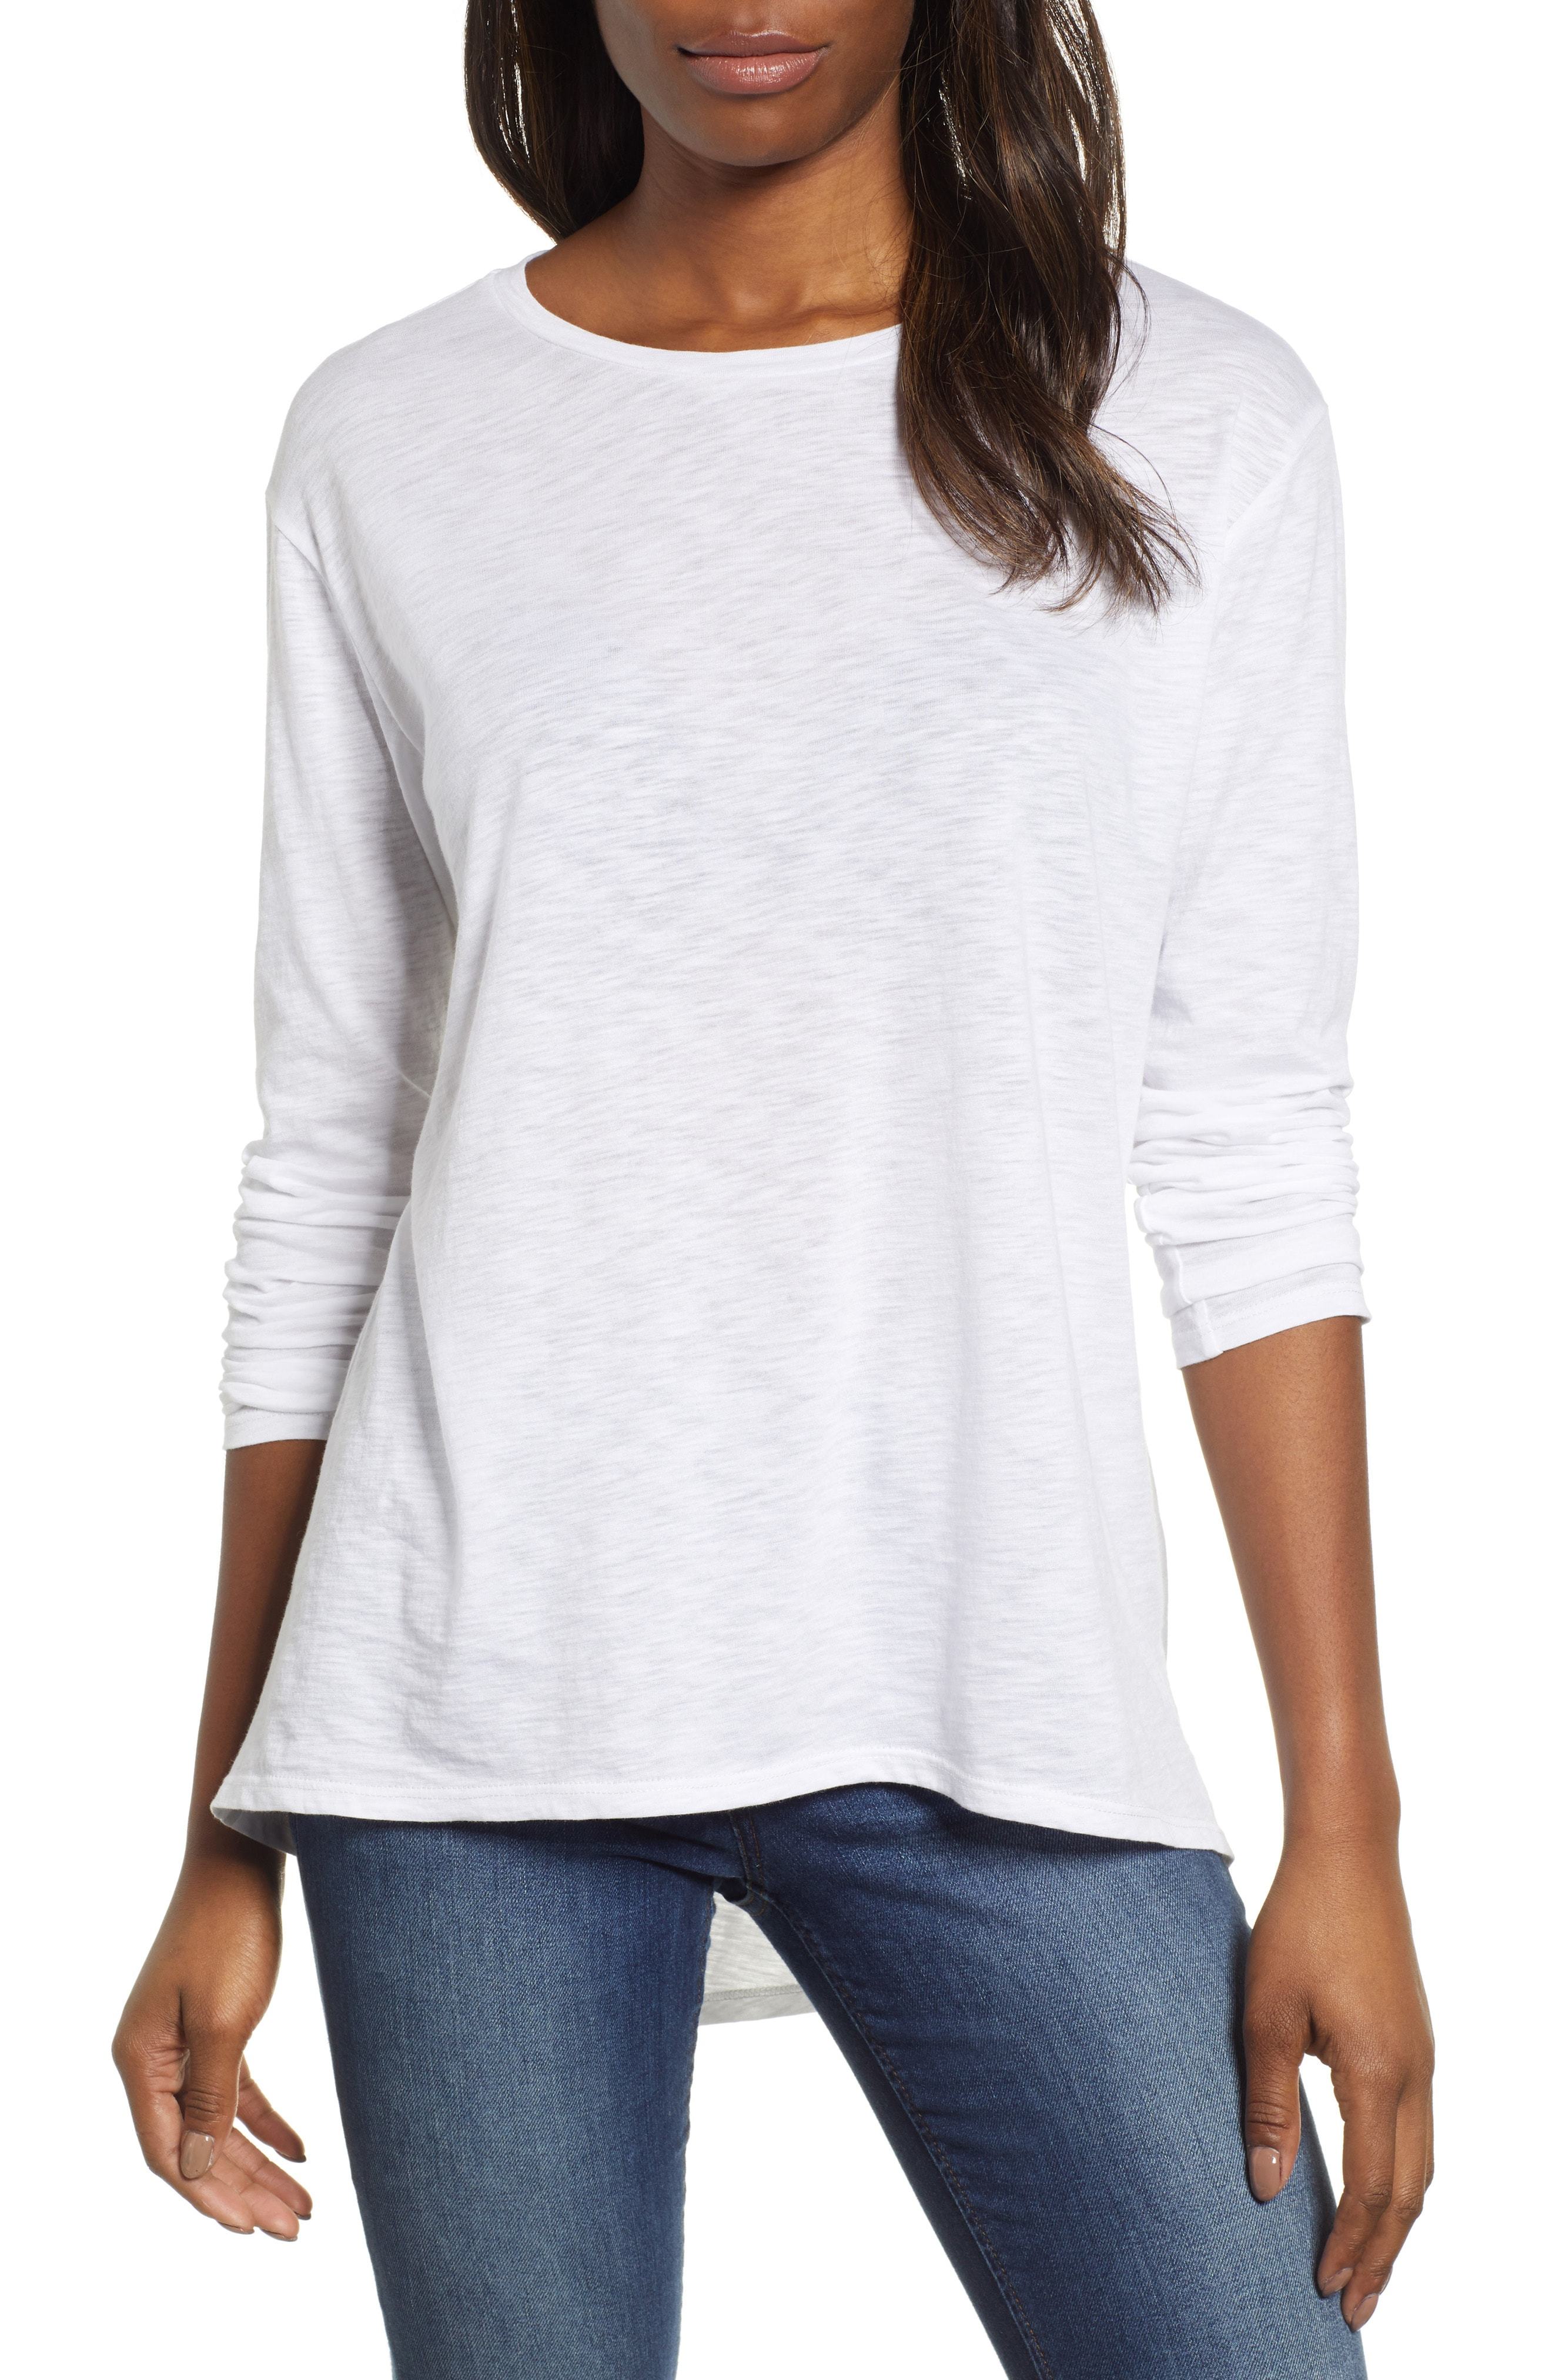 District DT132L Women's Perfect Tri Long Sleeve Tunic Tee - Blush Frost